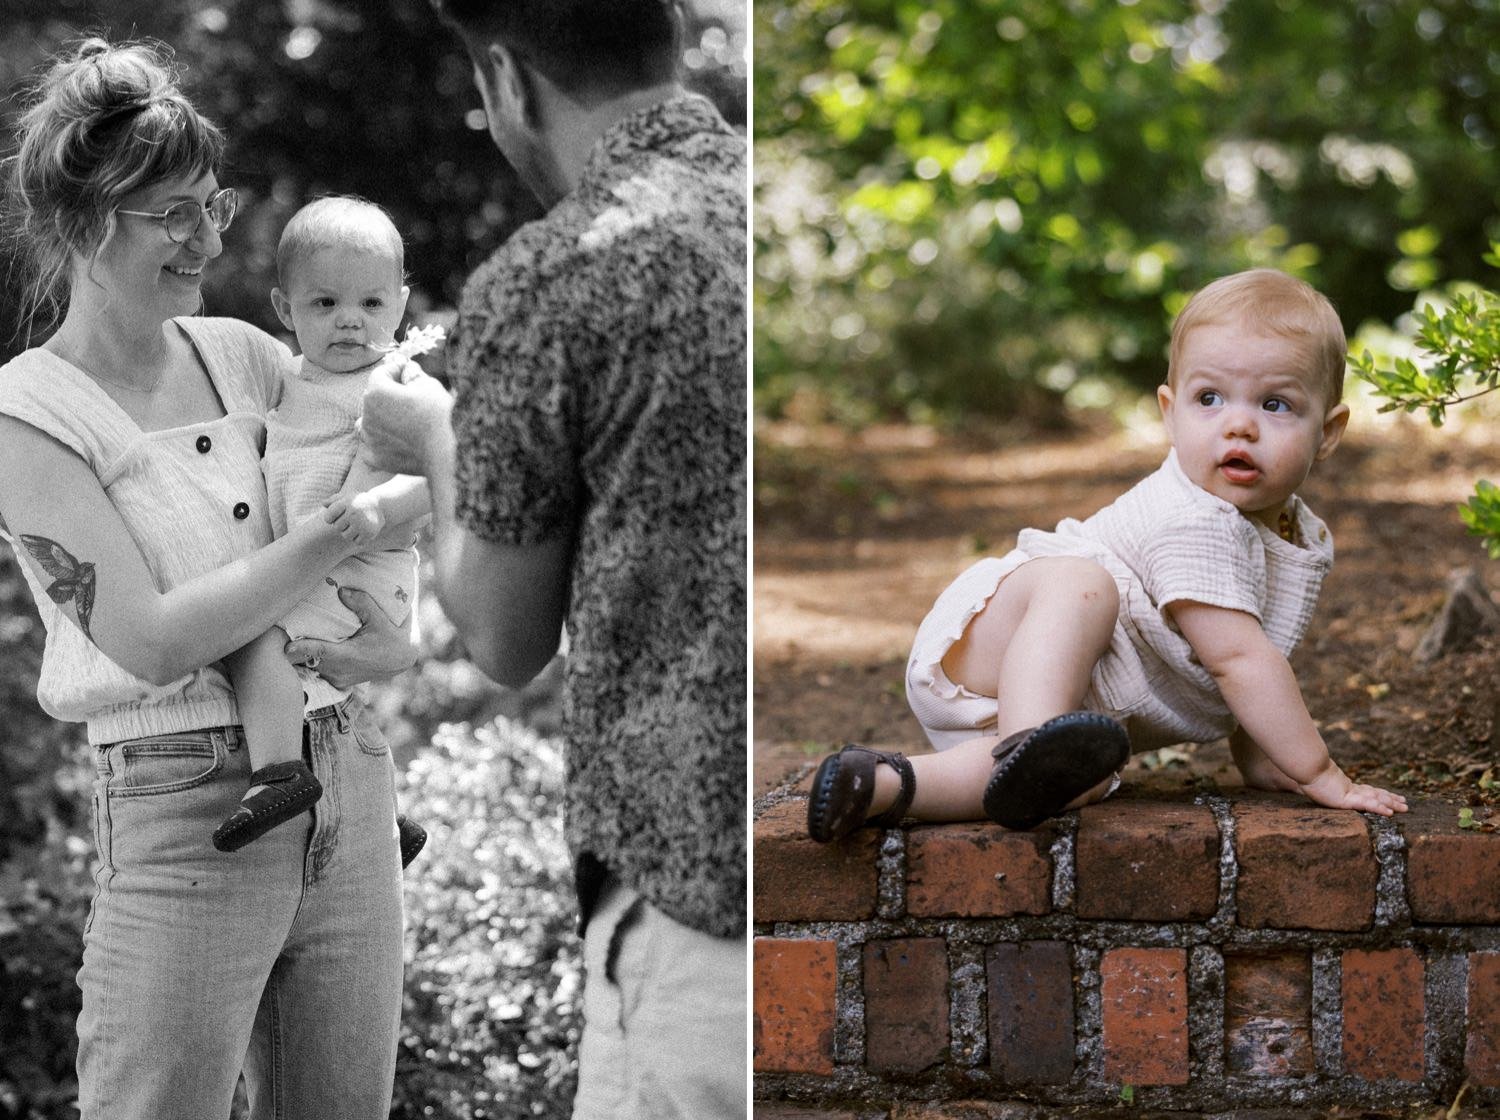 09_Portland Family Photographer-7384_Portland Family Photographer-7292_baby girl sits on brick step surrounded by greenery.jpg